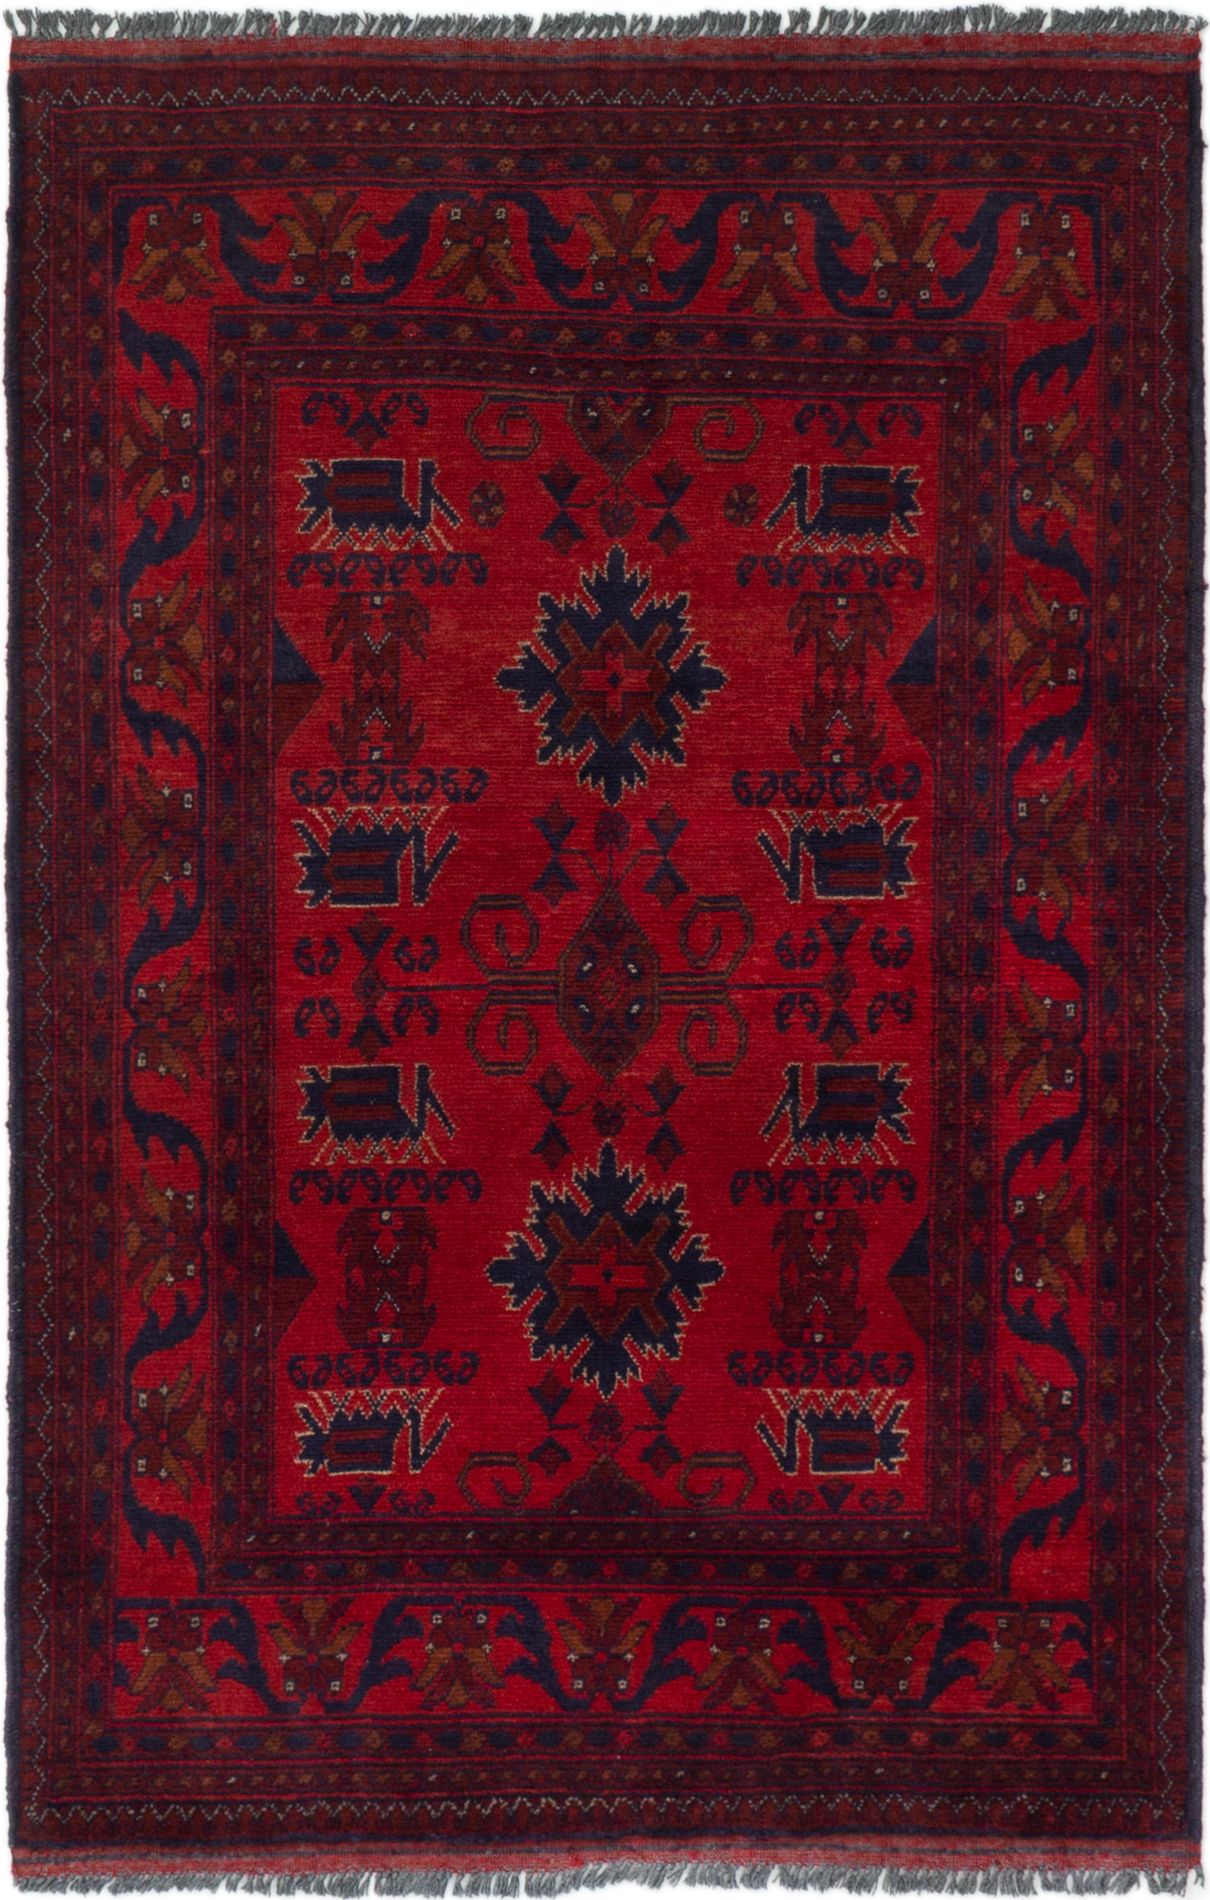 Hand-knotted Finest Khal Mohammadi Red Wool Rug 3'2" x 4'11"  Size: 3'2" x 4'11"  